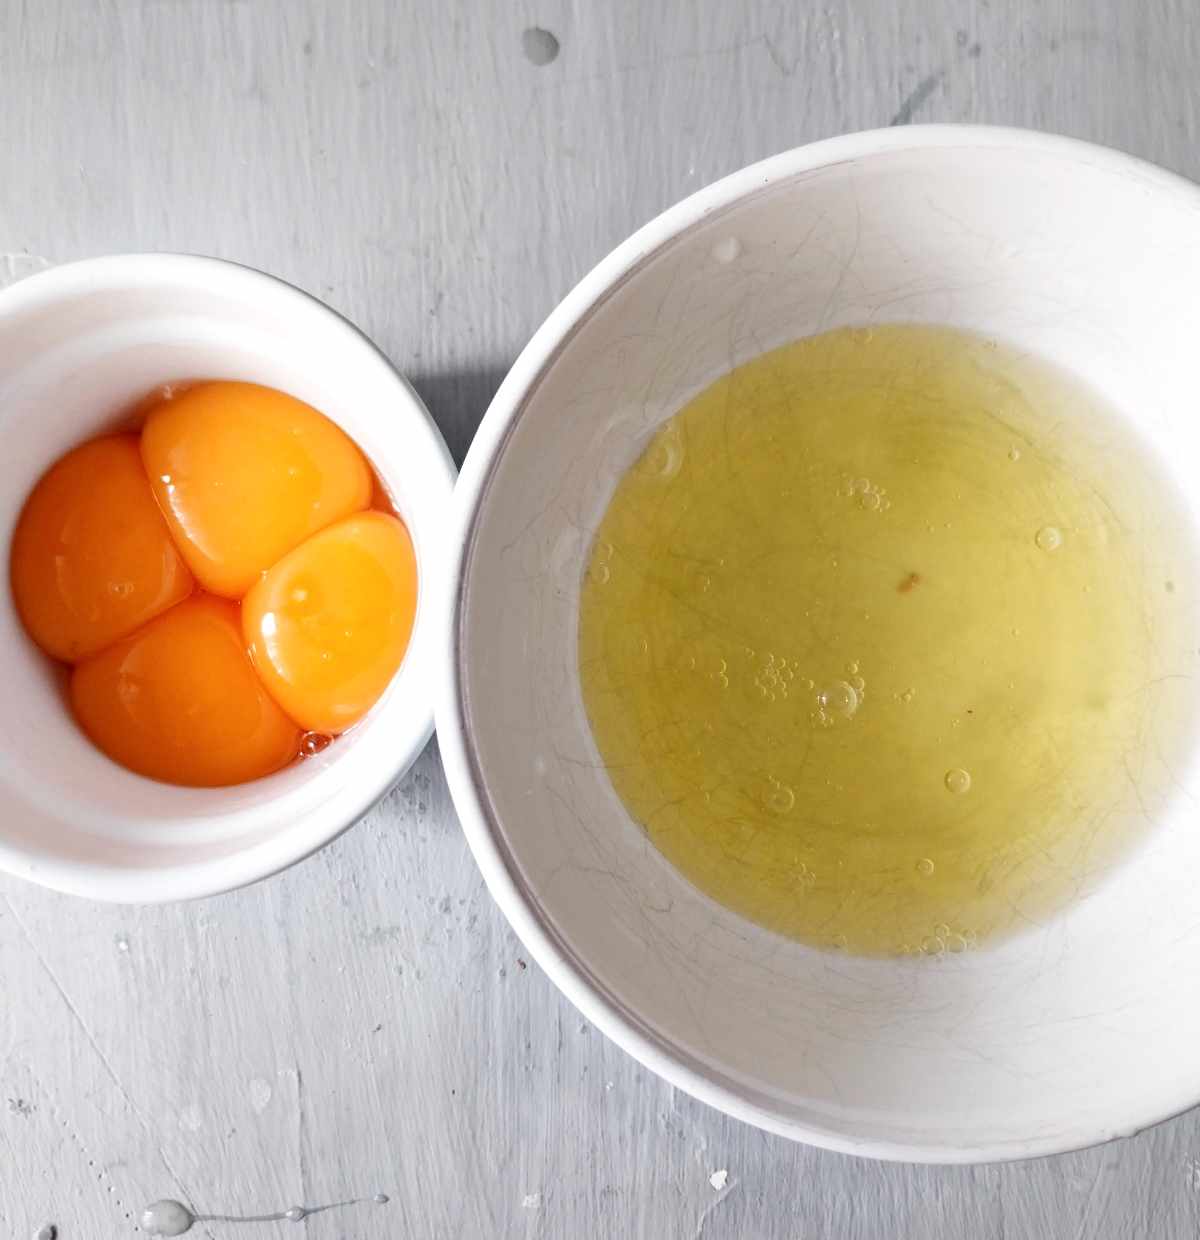 Egg yolks and egg whites in separate bowls.